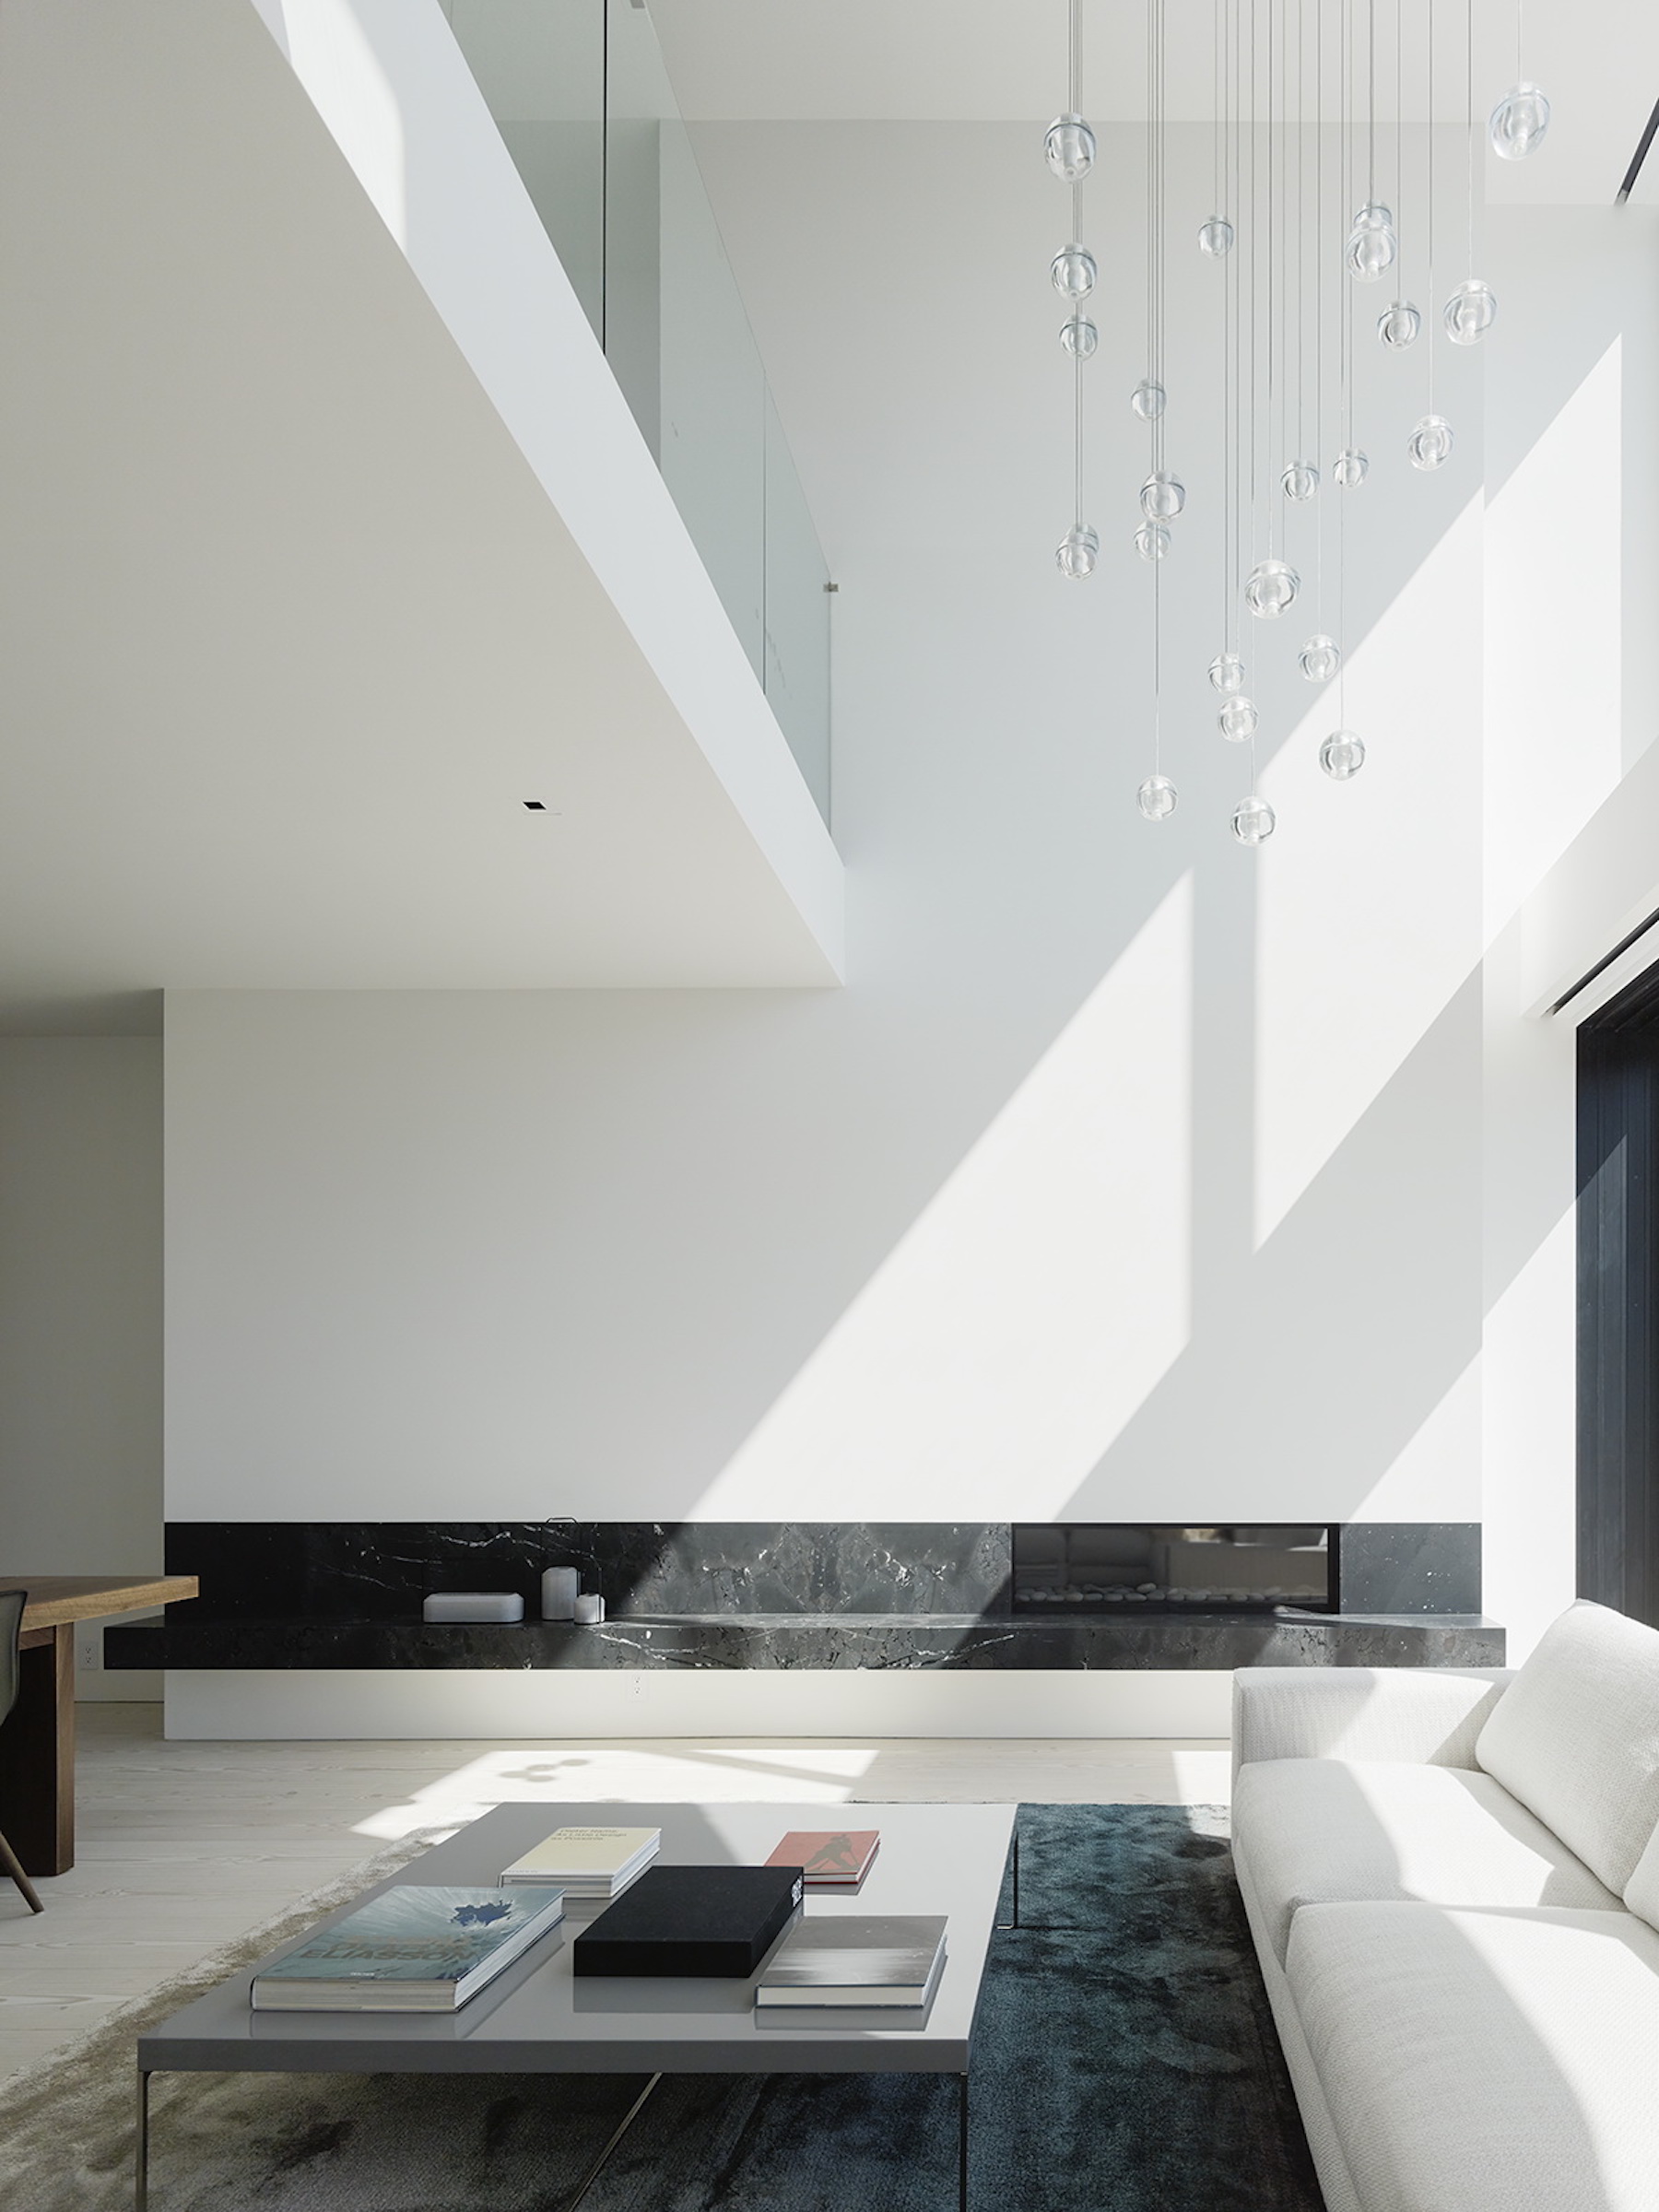 Remember House by Edmonds + Lee Architects